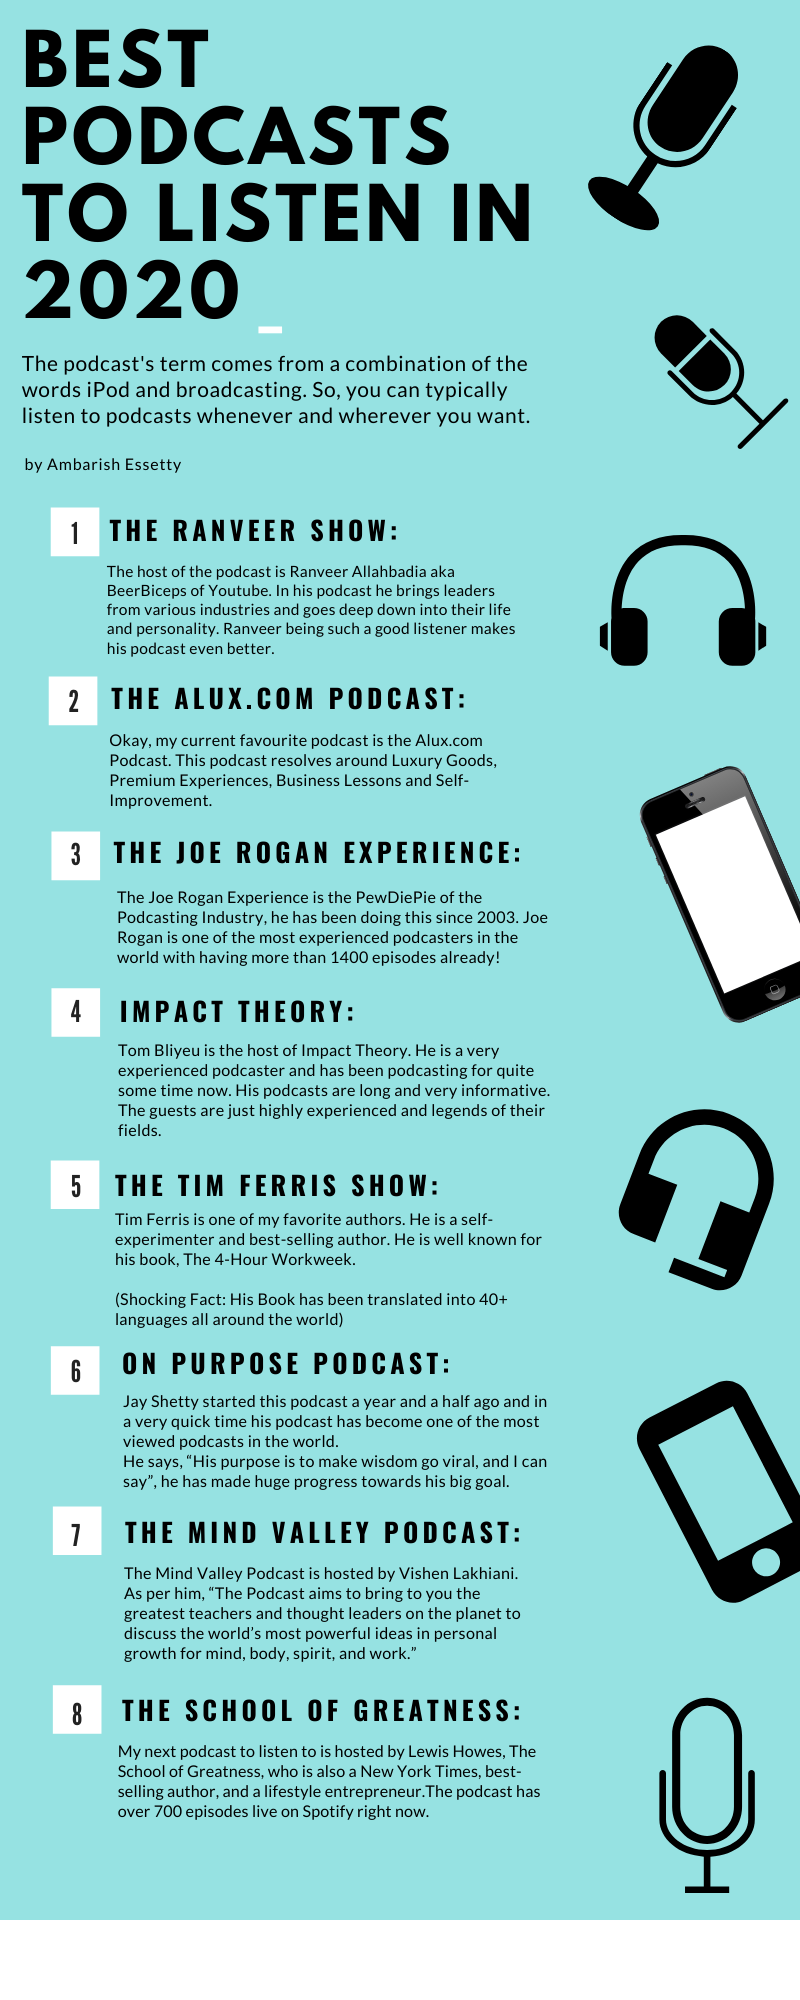 Best Podcasts to listen in 2020